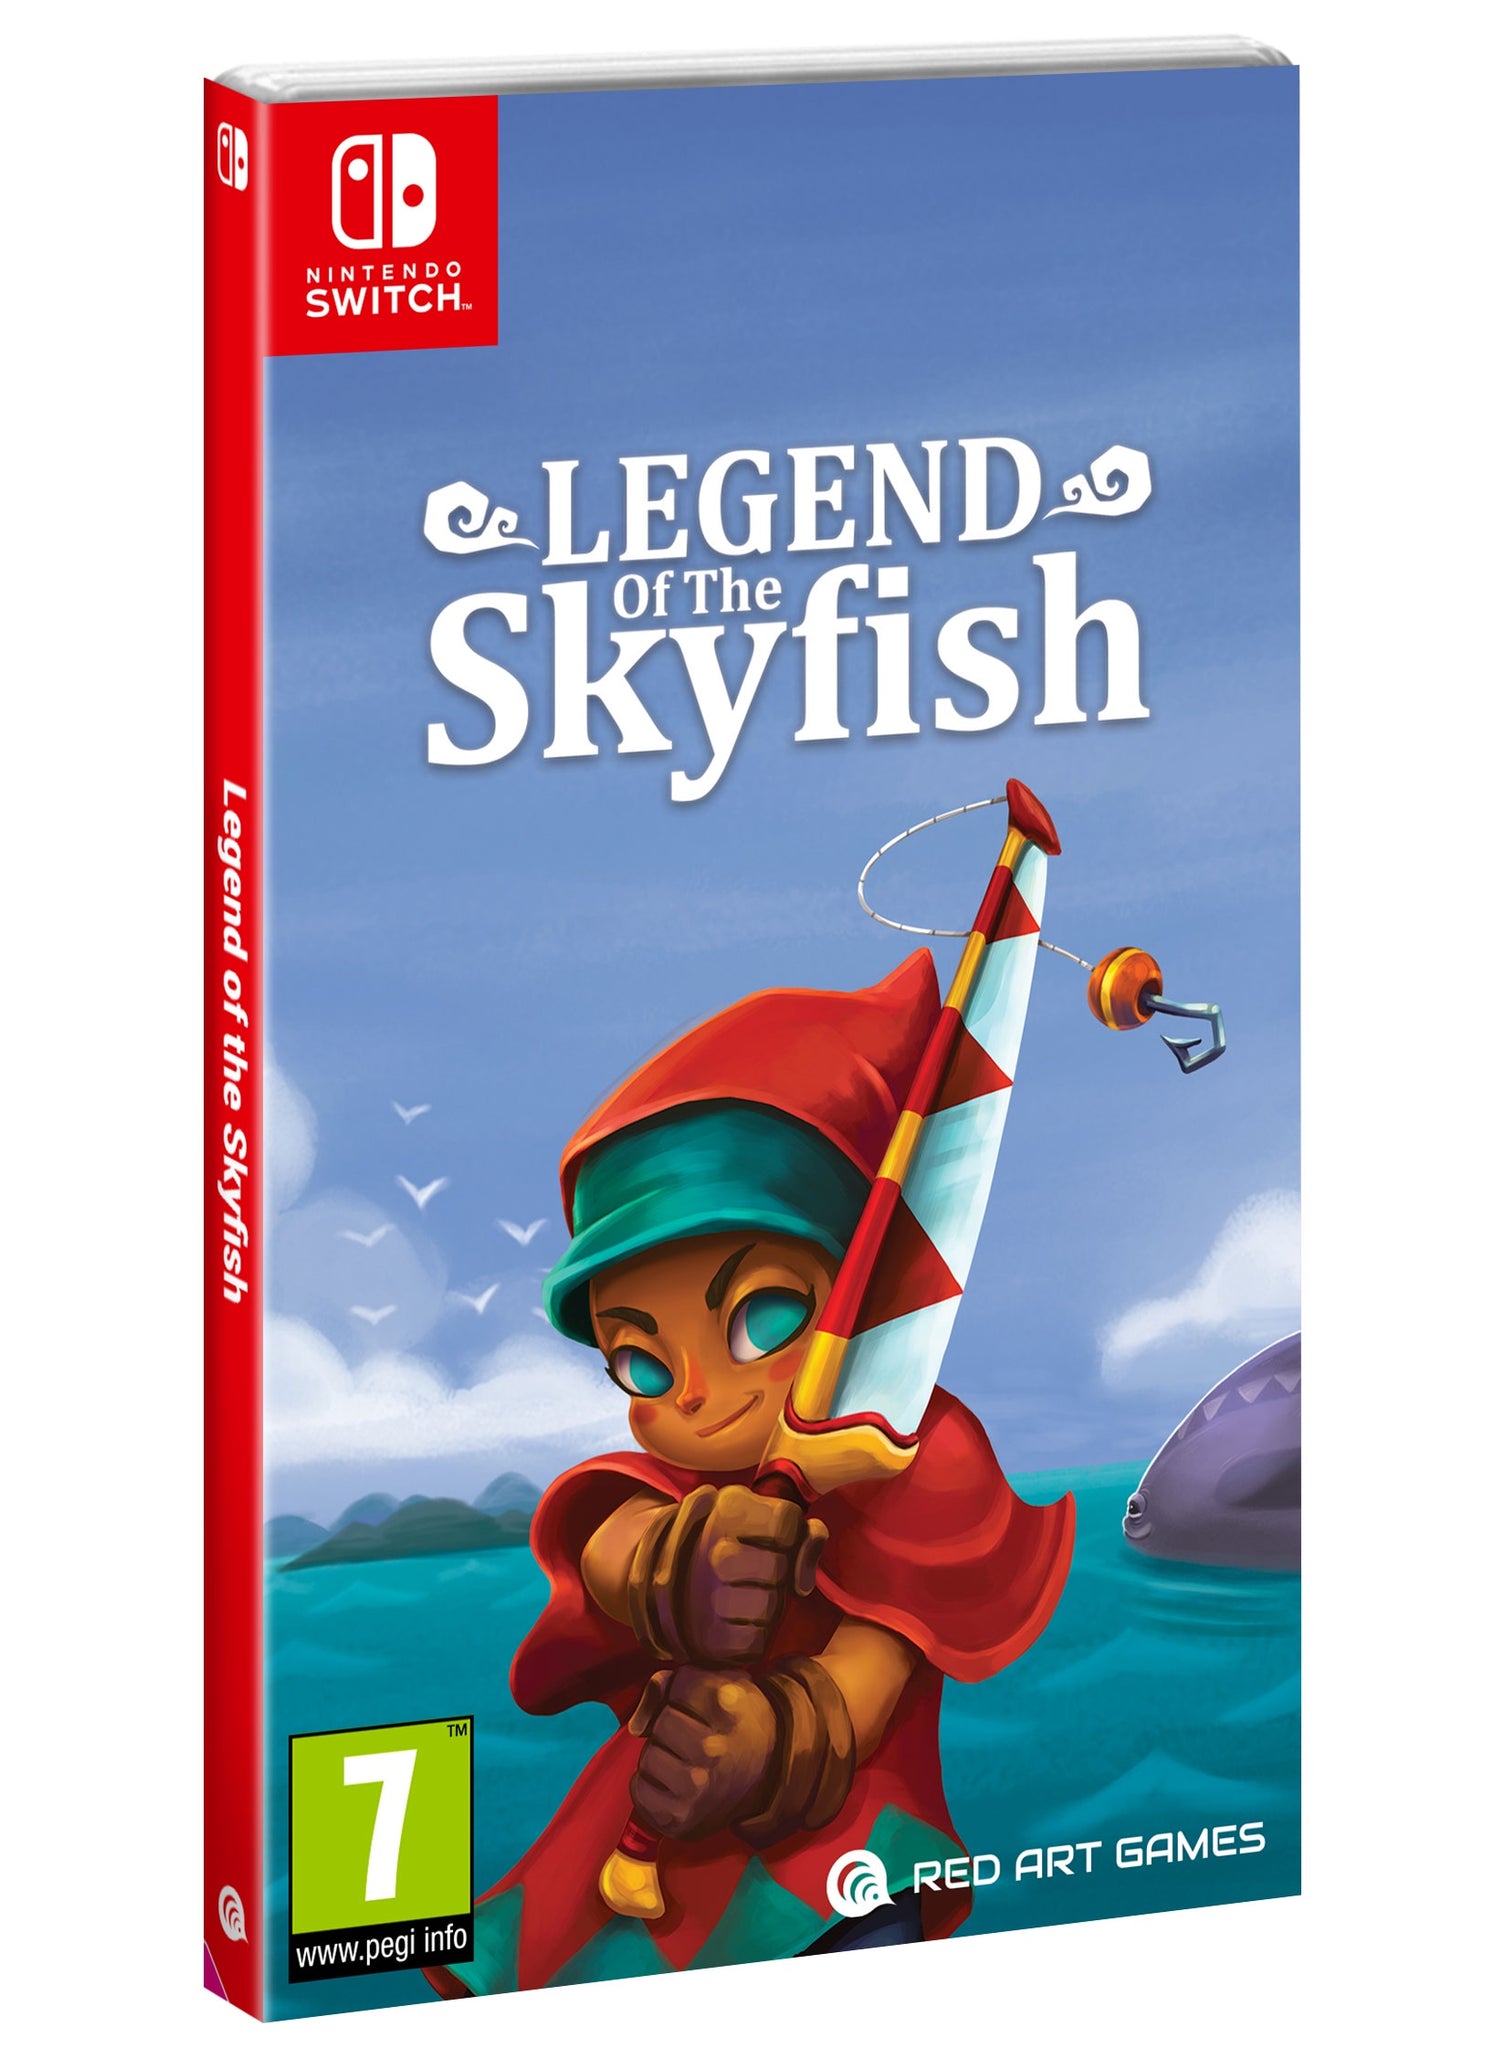 Legend Of The Skyfish (PAL Import - Plays in English) - Switch